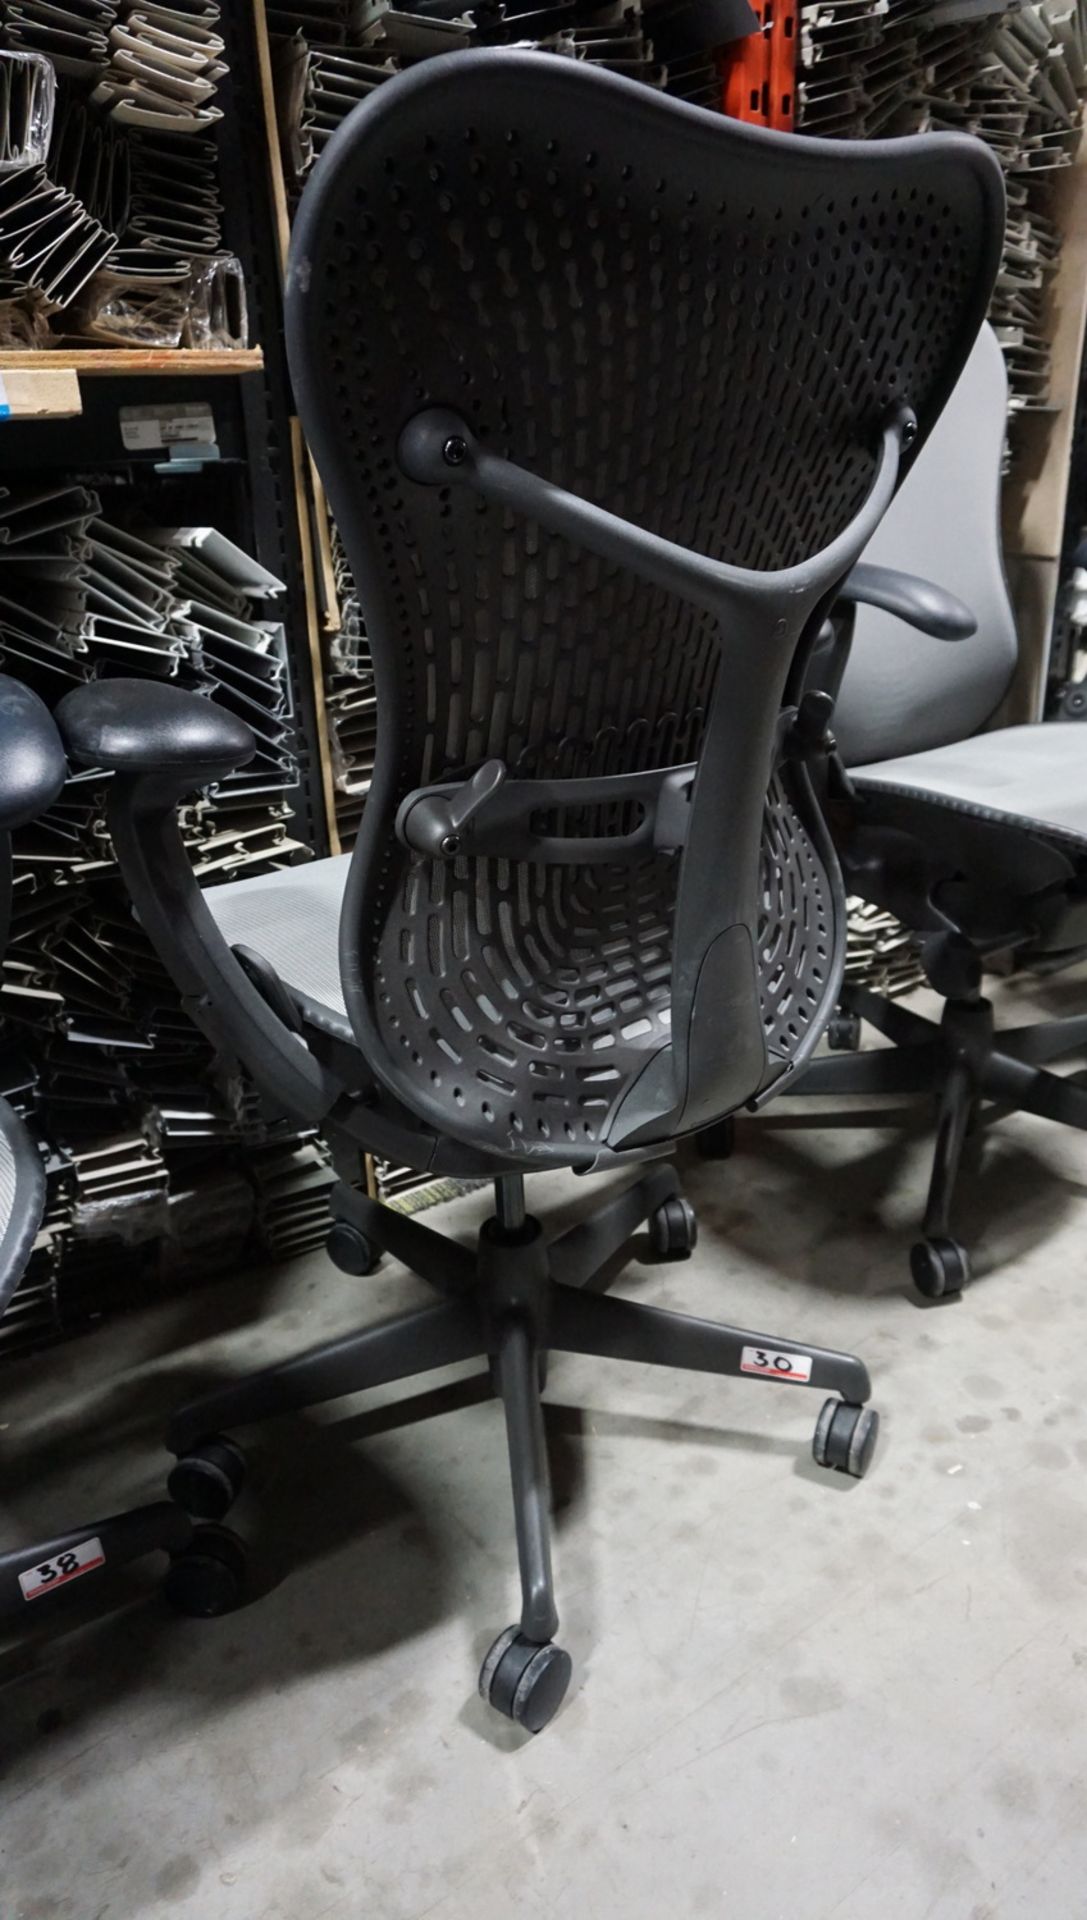 HERMAN MILLER MIRRA 1 OFFICE CHAIR W/ LUMBAR SUPPORT, BACK LOCK, ARM / SEAT ADJUSTMENTS - Image 2 of 2